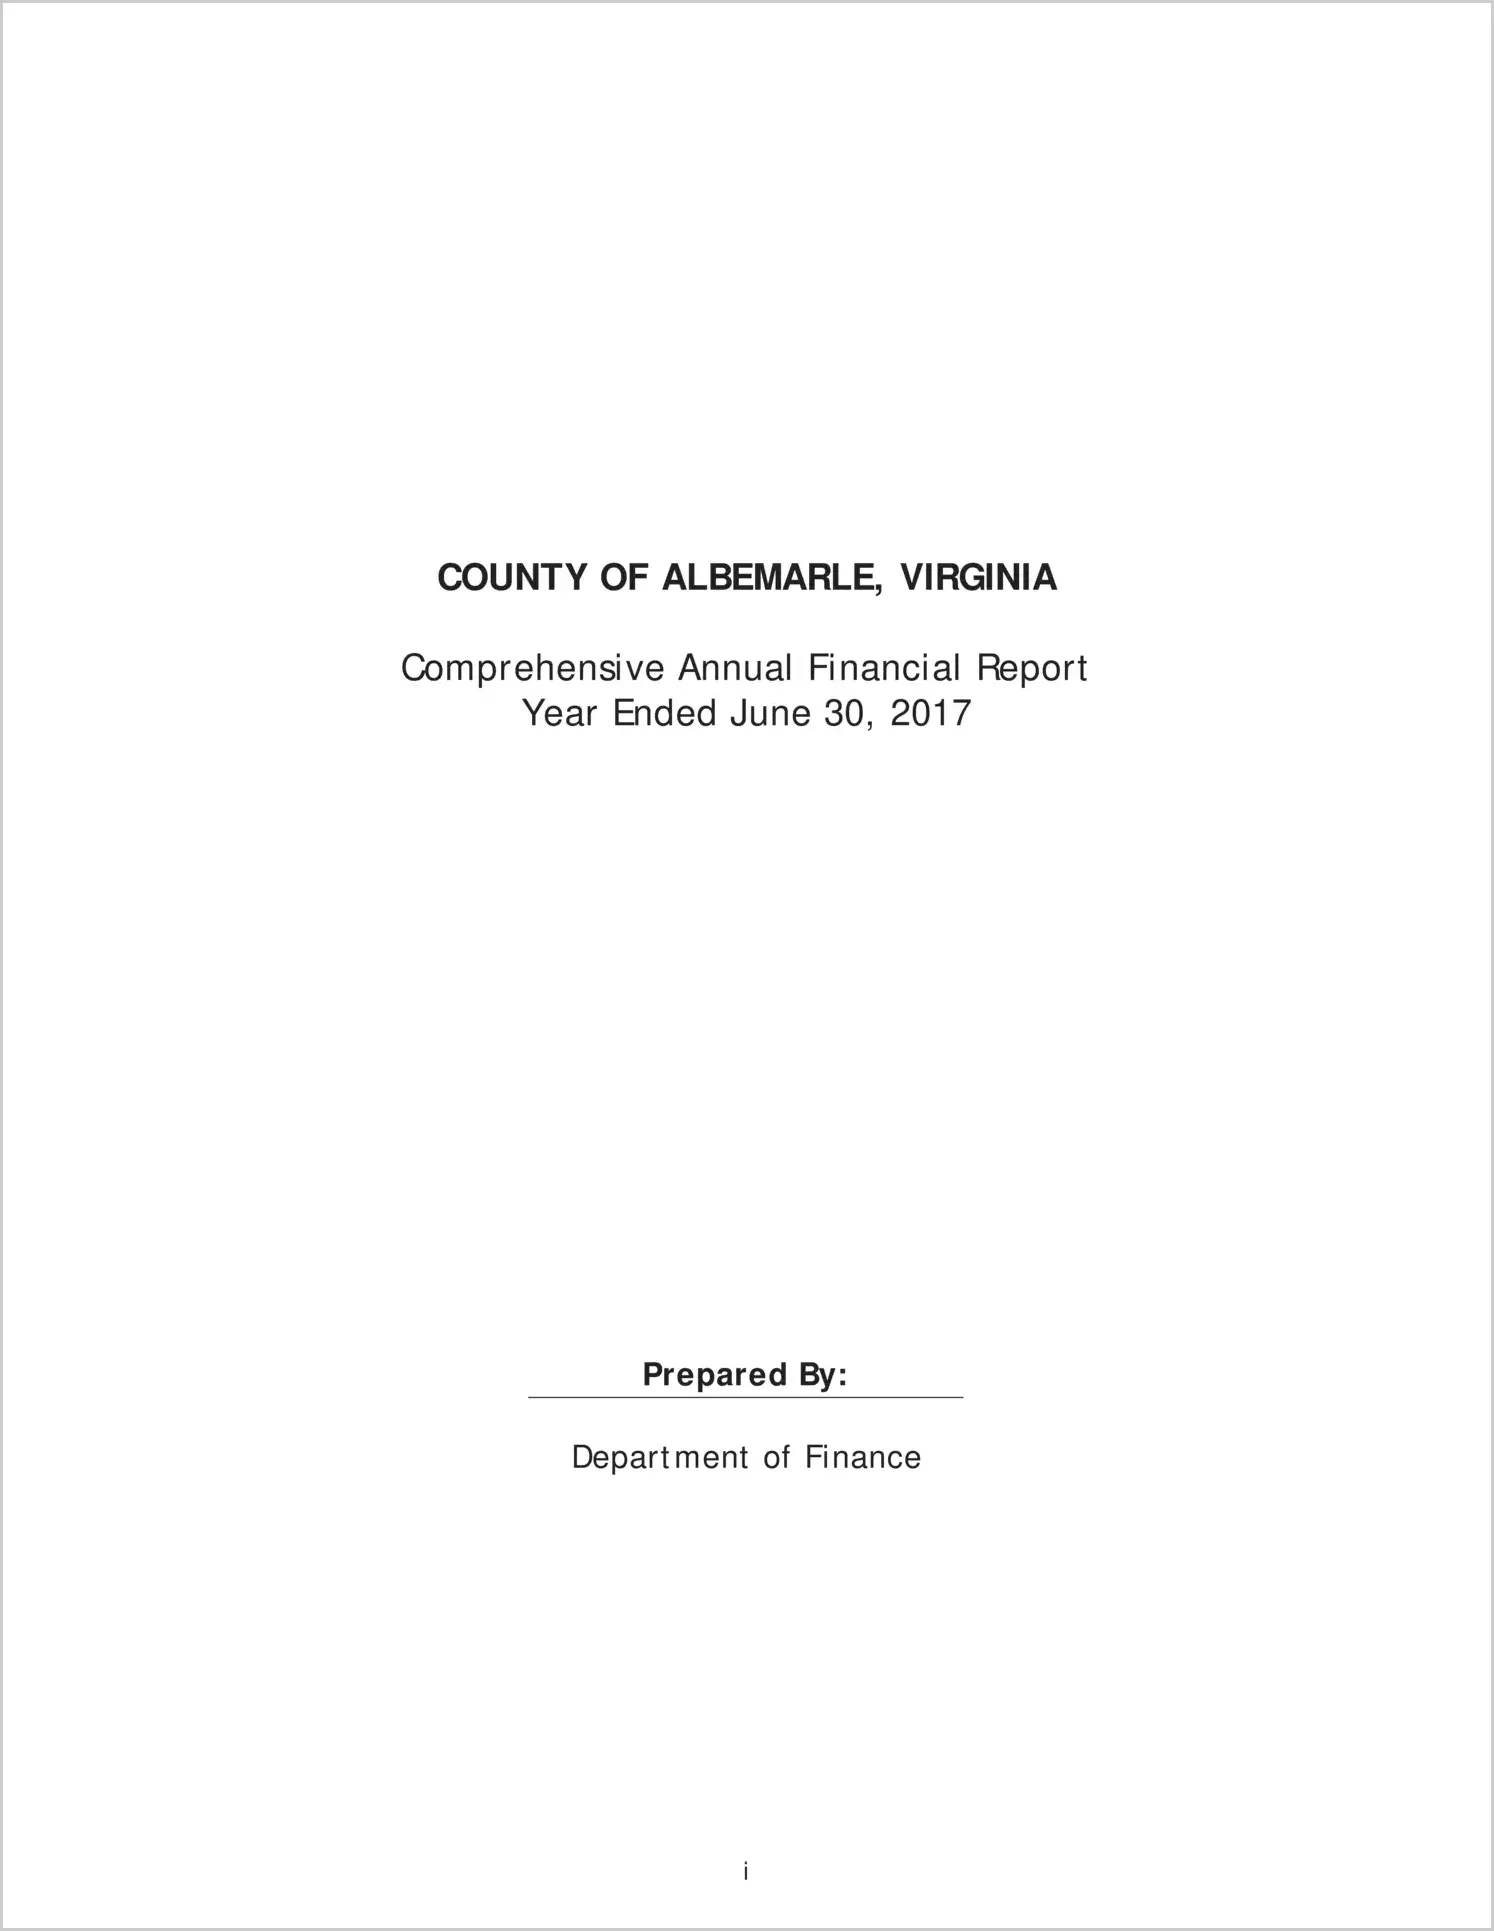 2017 Annual Financial Report for County of Albemarle